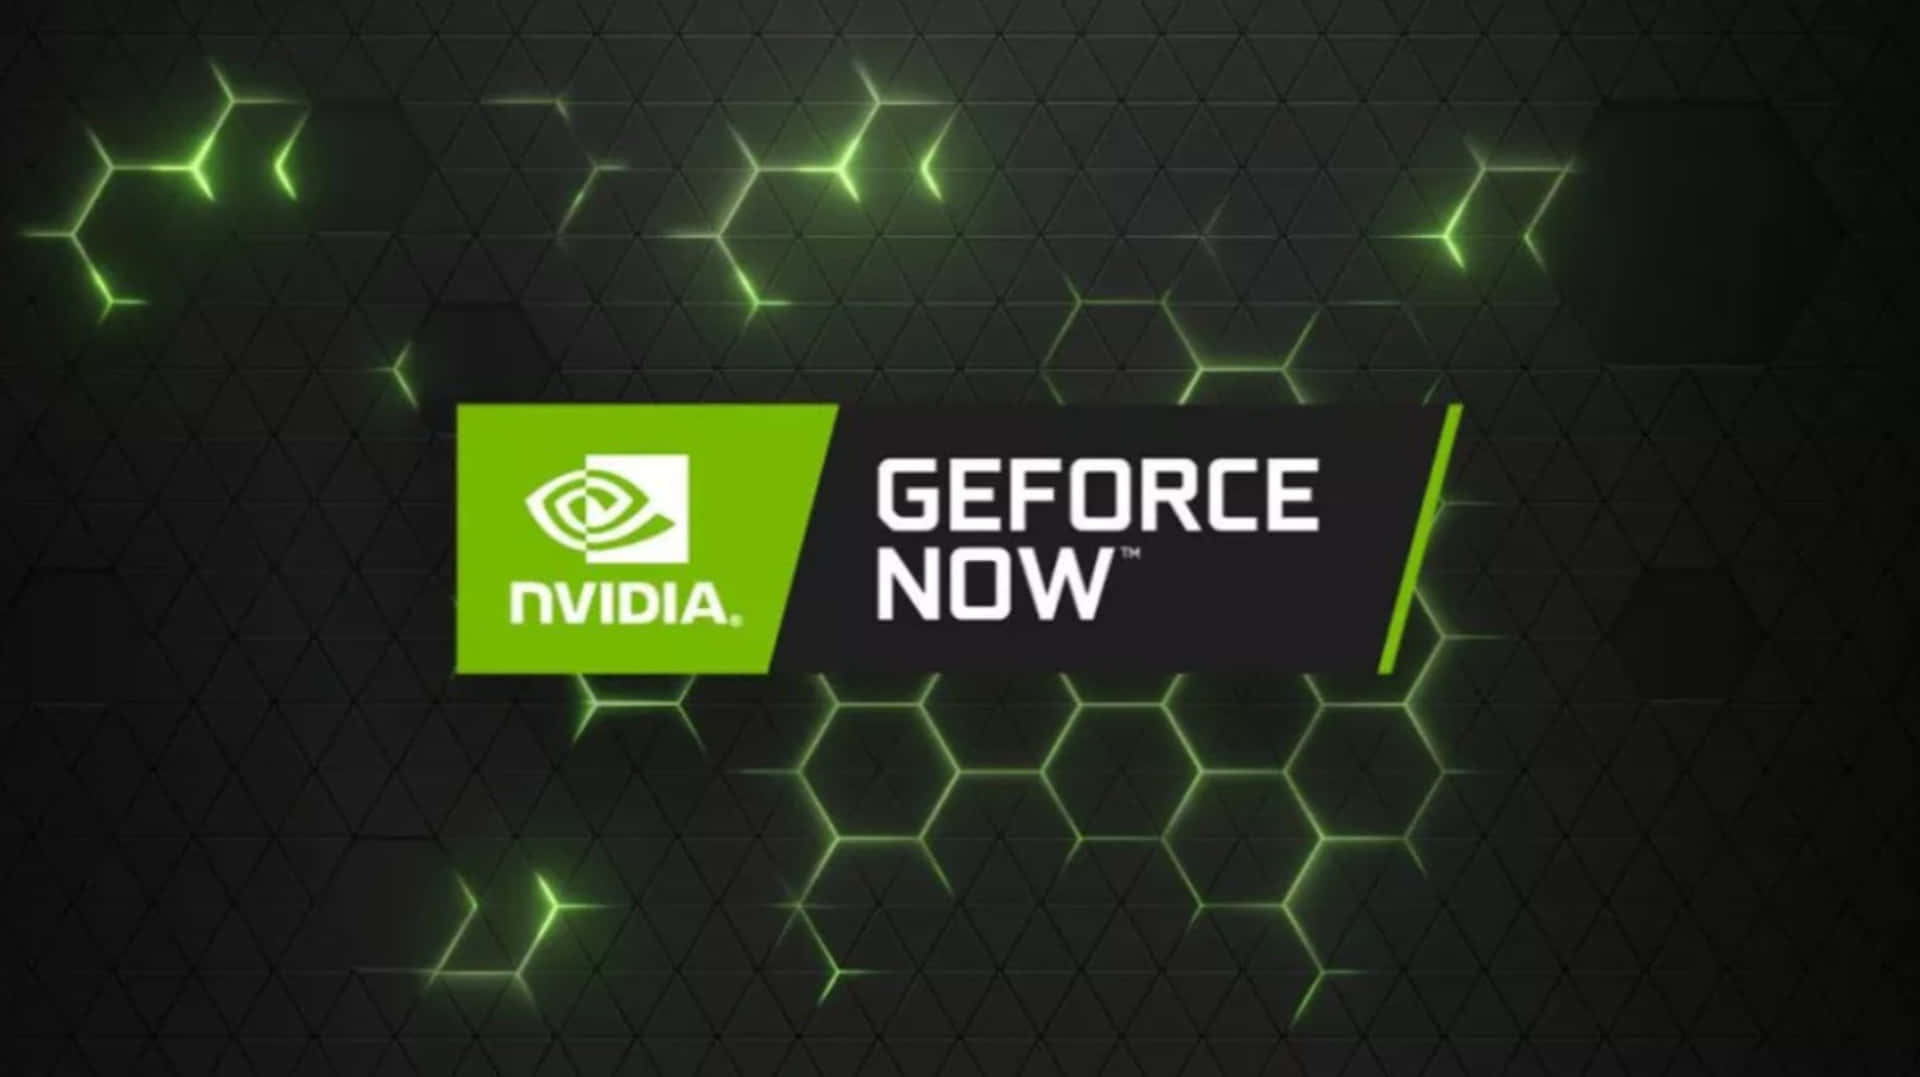 NVIDIA Puts High Performance Graphics In The Palm Of Your Hand